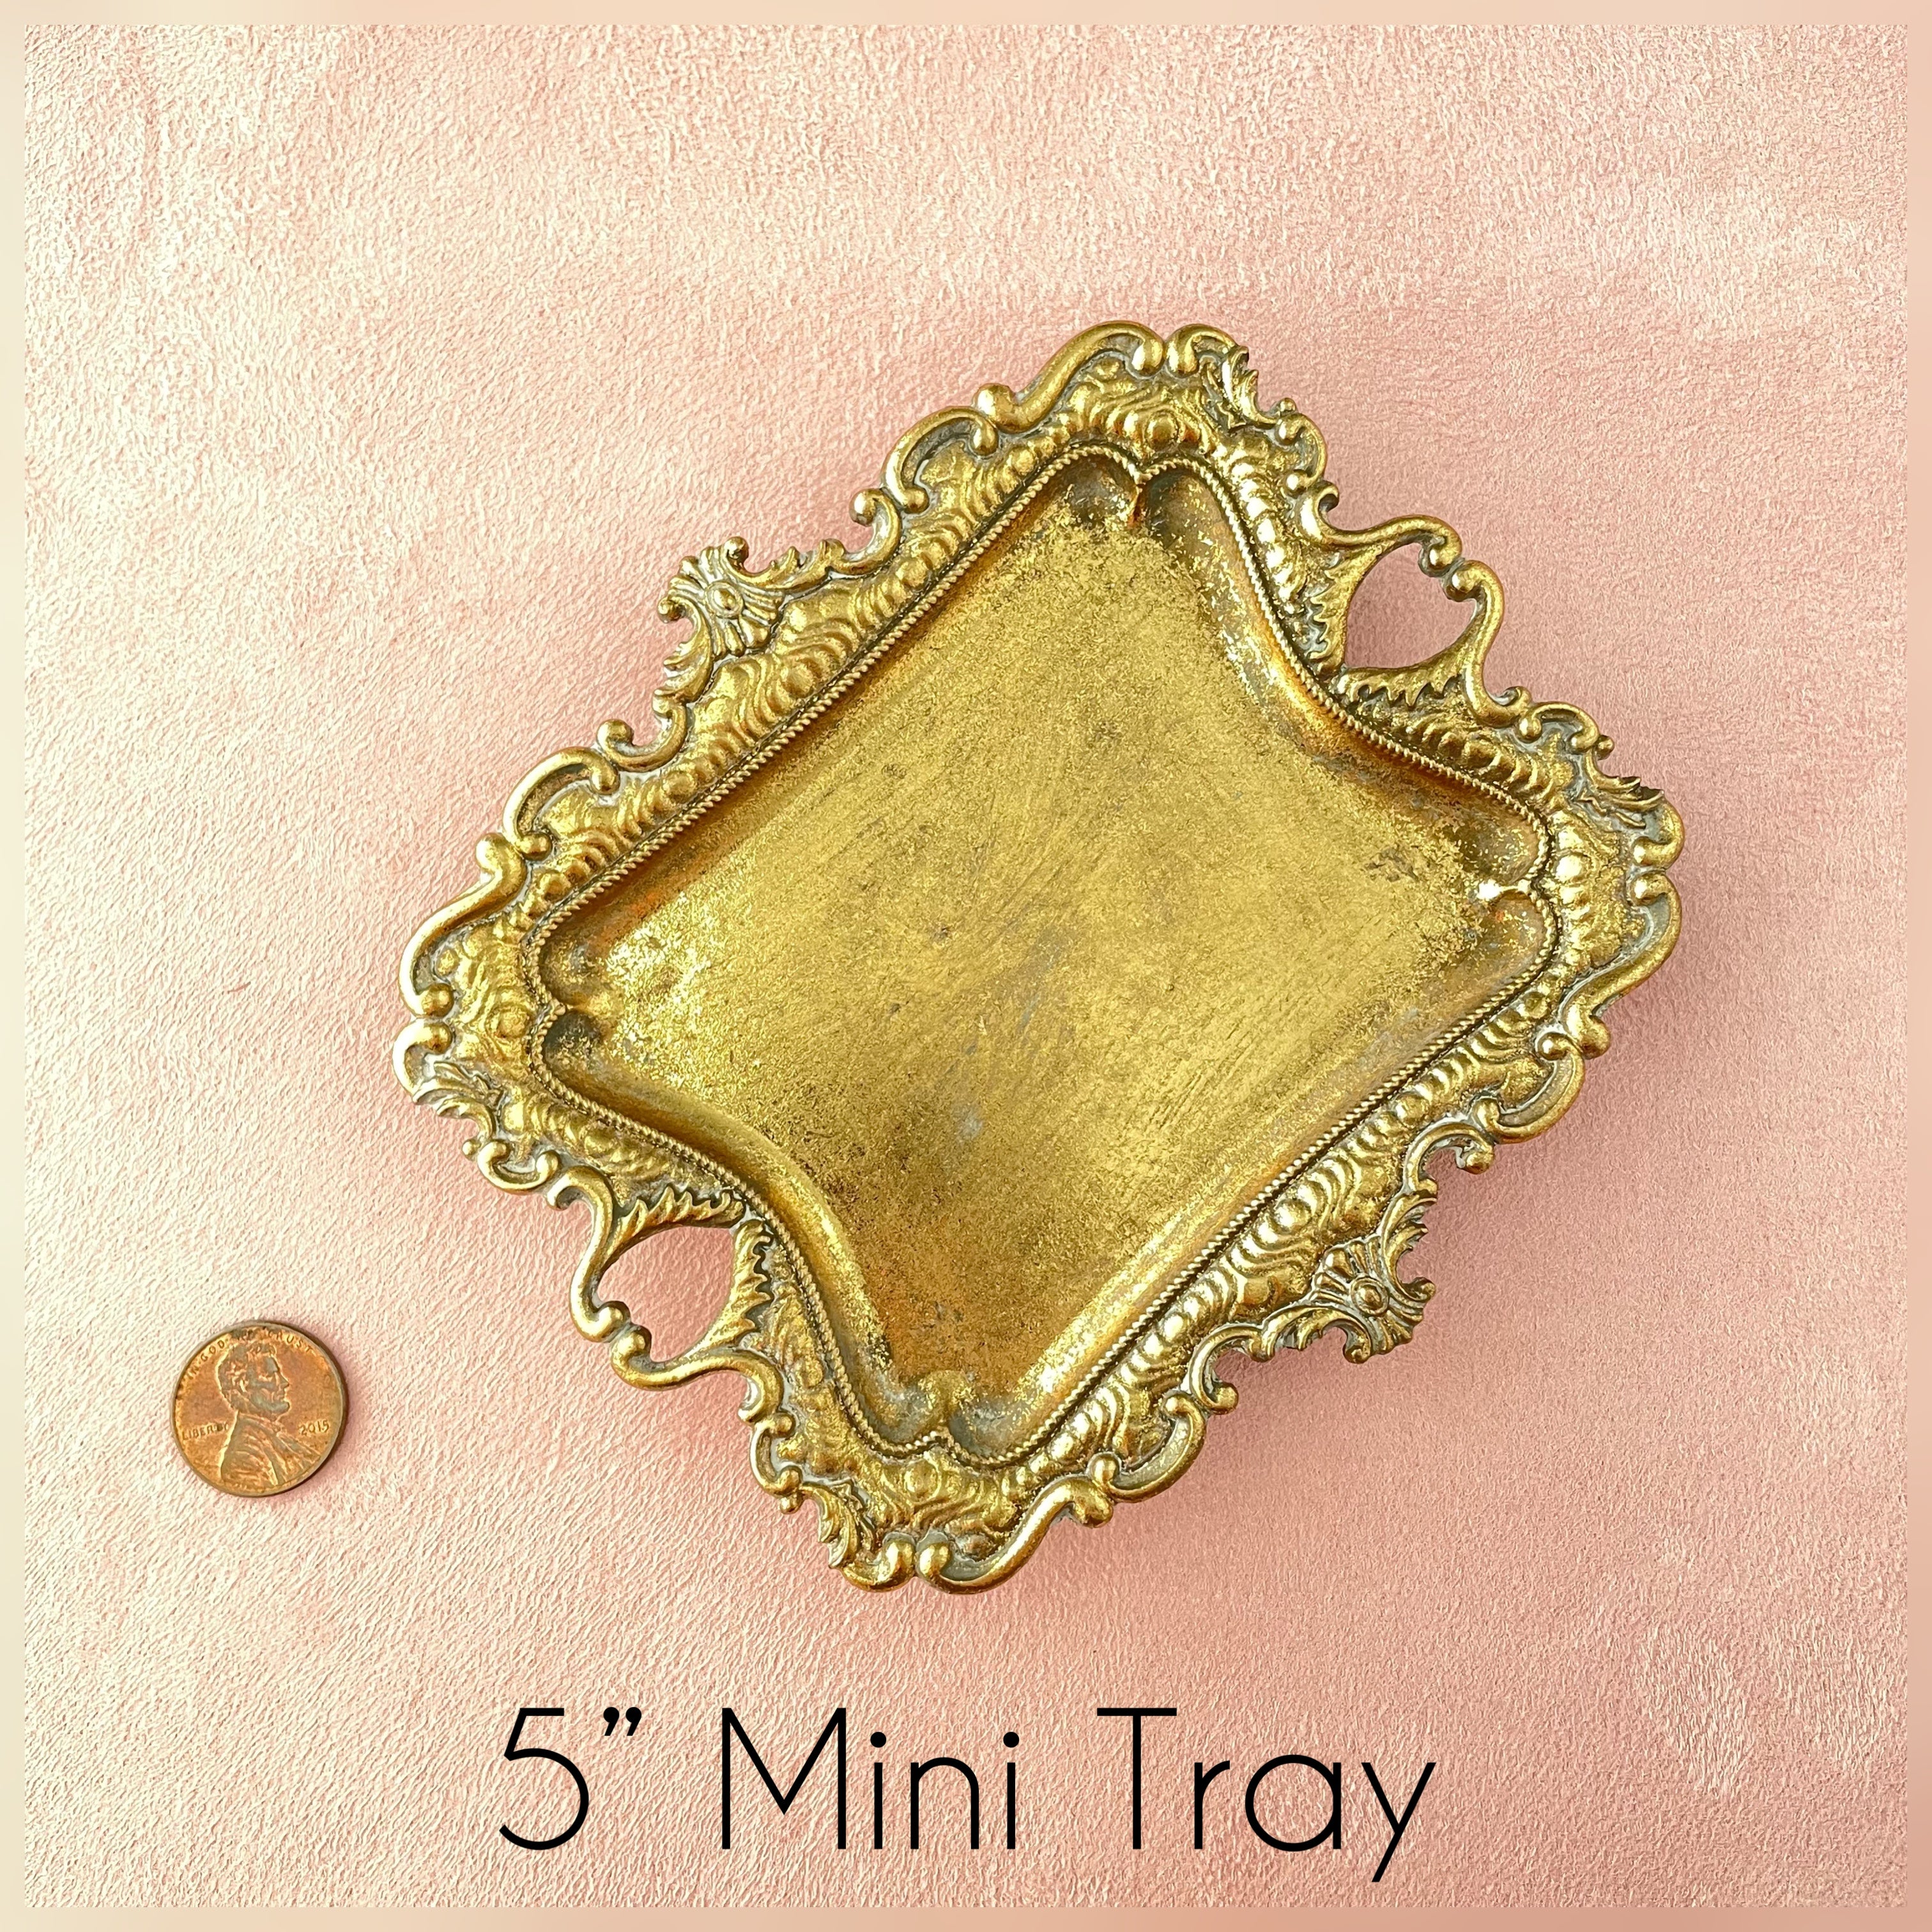 5 inch mini gold tray with penny beside for size reference - wedding flat lay props from Champagne & GRIT